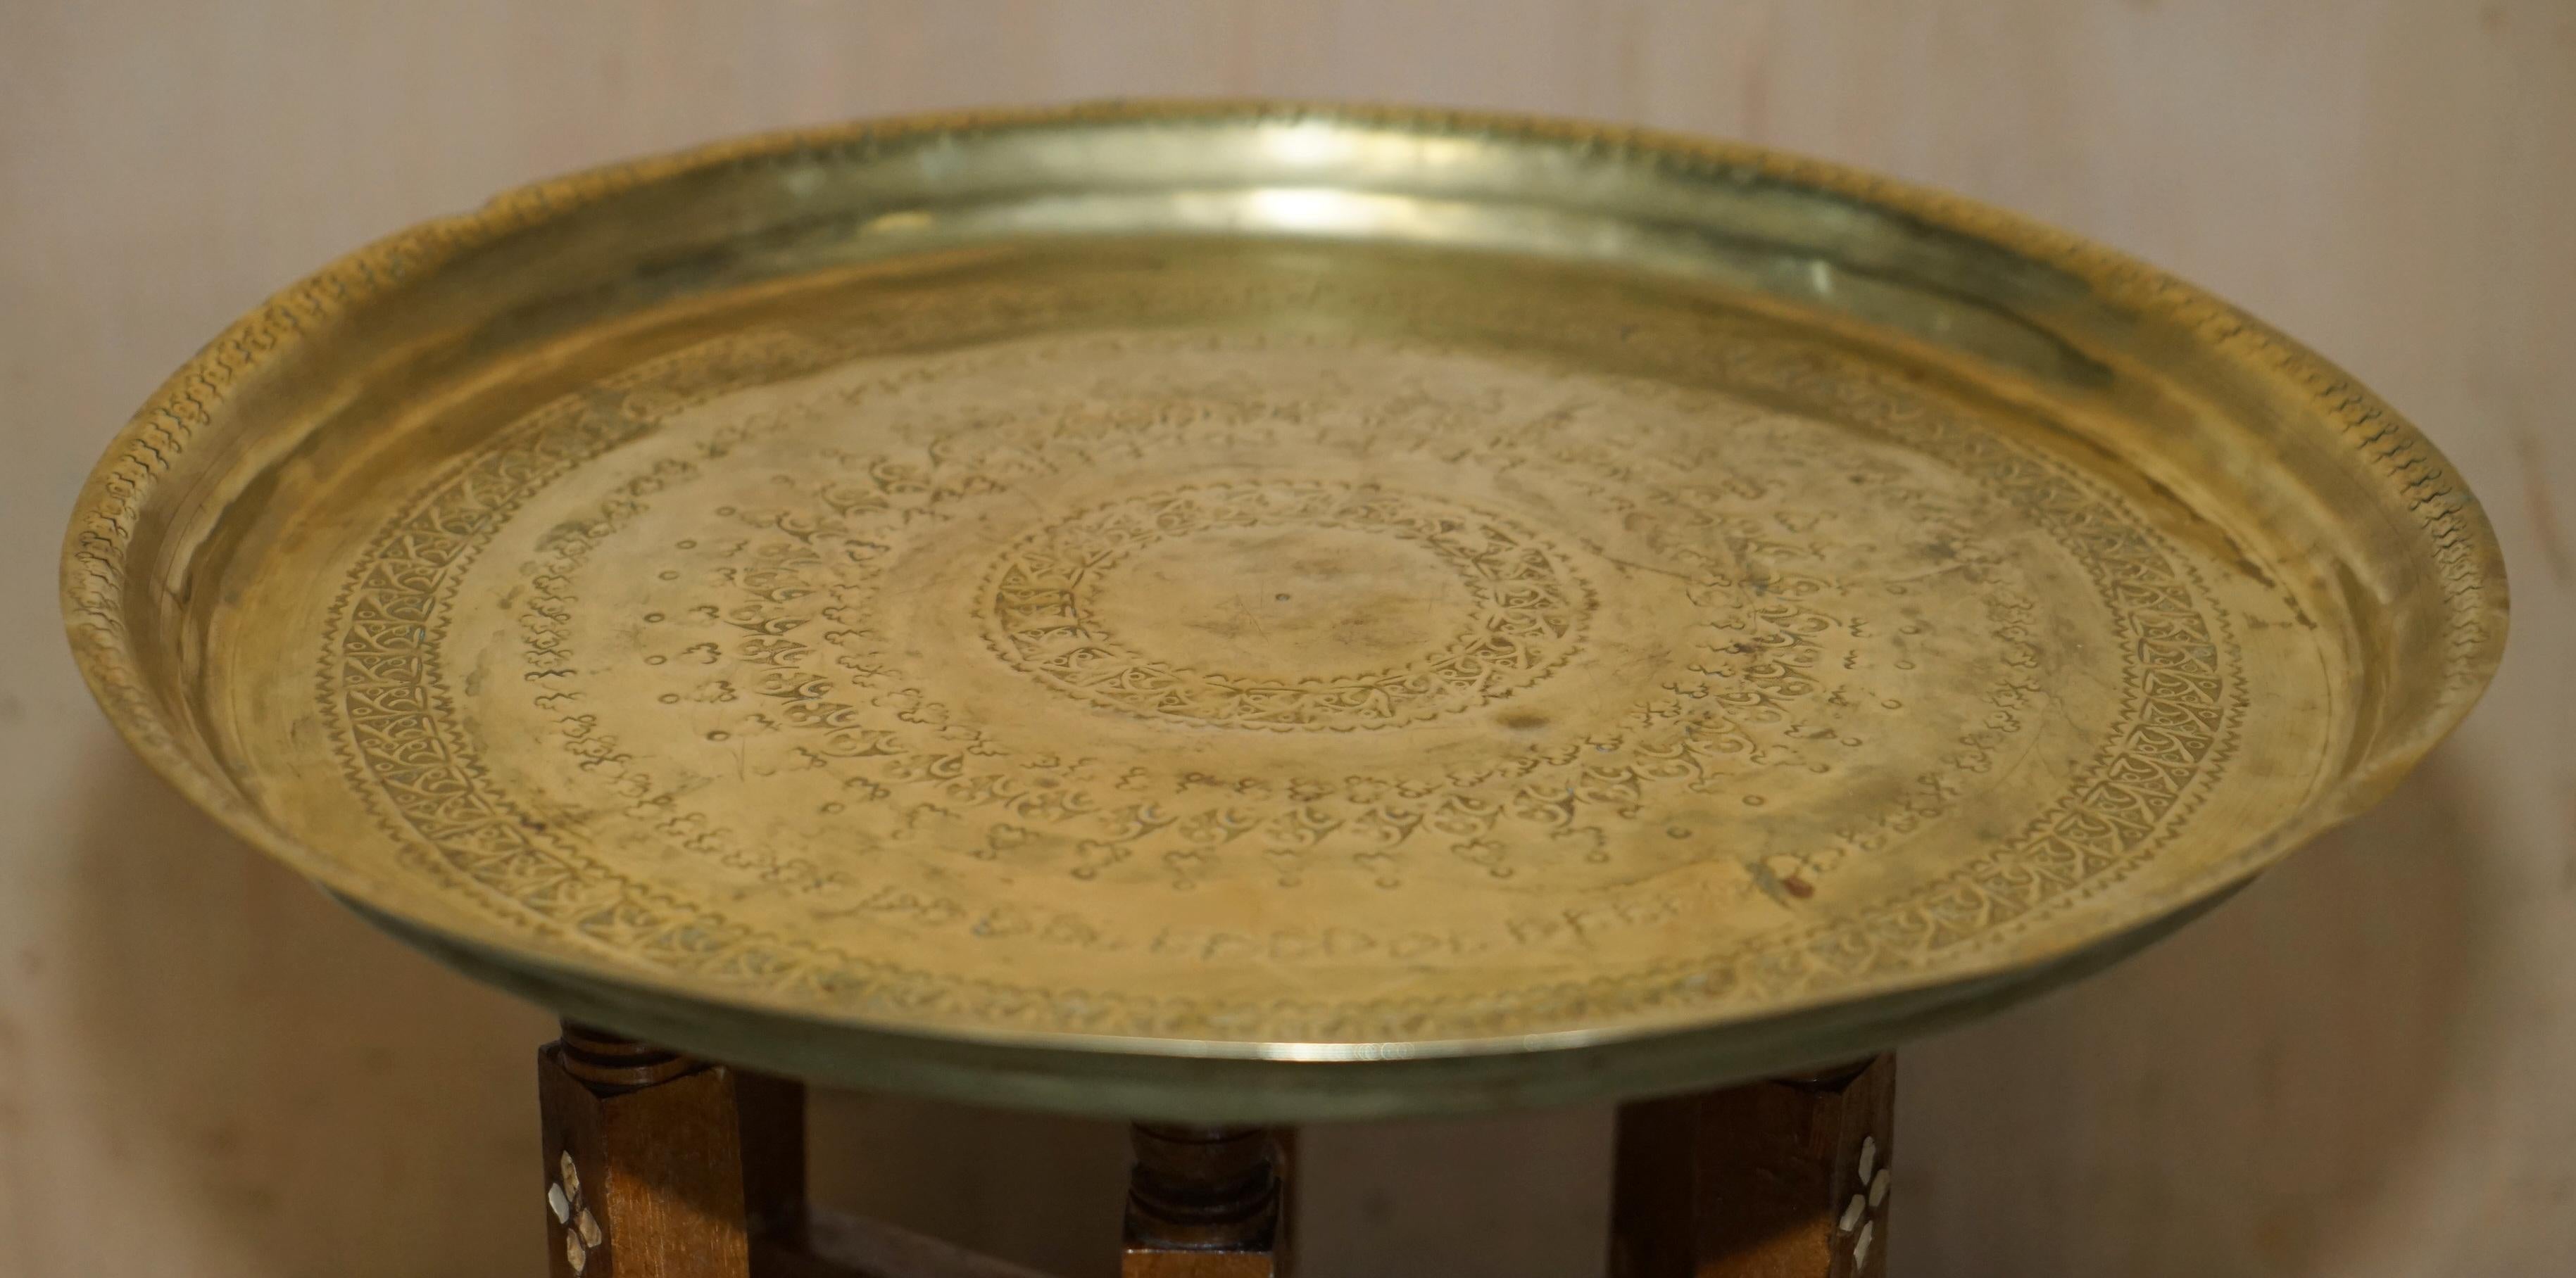 Royal House Antiques

Royal House Antiques is delighted to offer for sale this ornately hand carved Moroccan brass tray table retailed through Liberty's in the 1880-1920's

Please note the delivery fee listed is just a guide, it covers within the